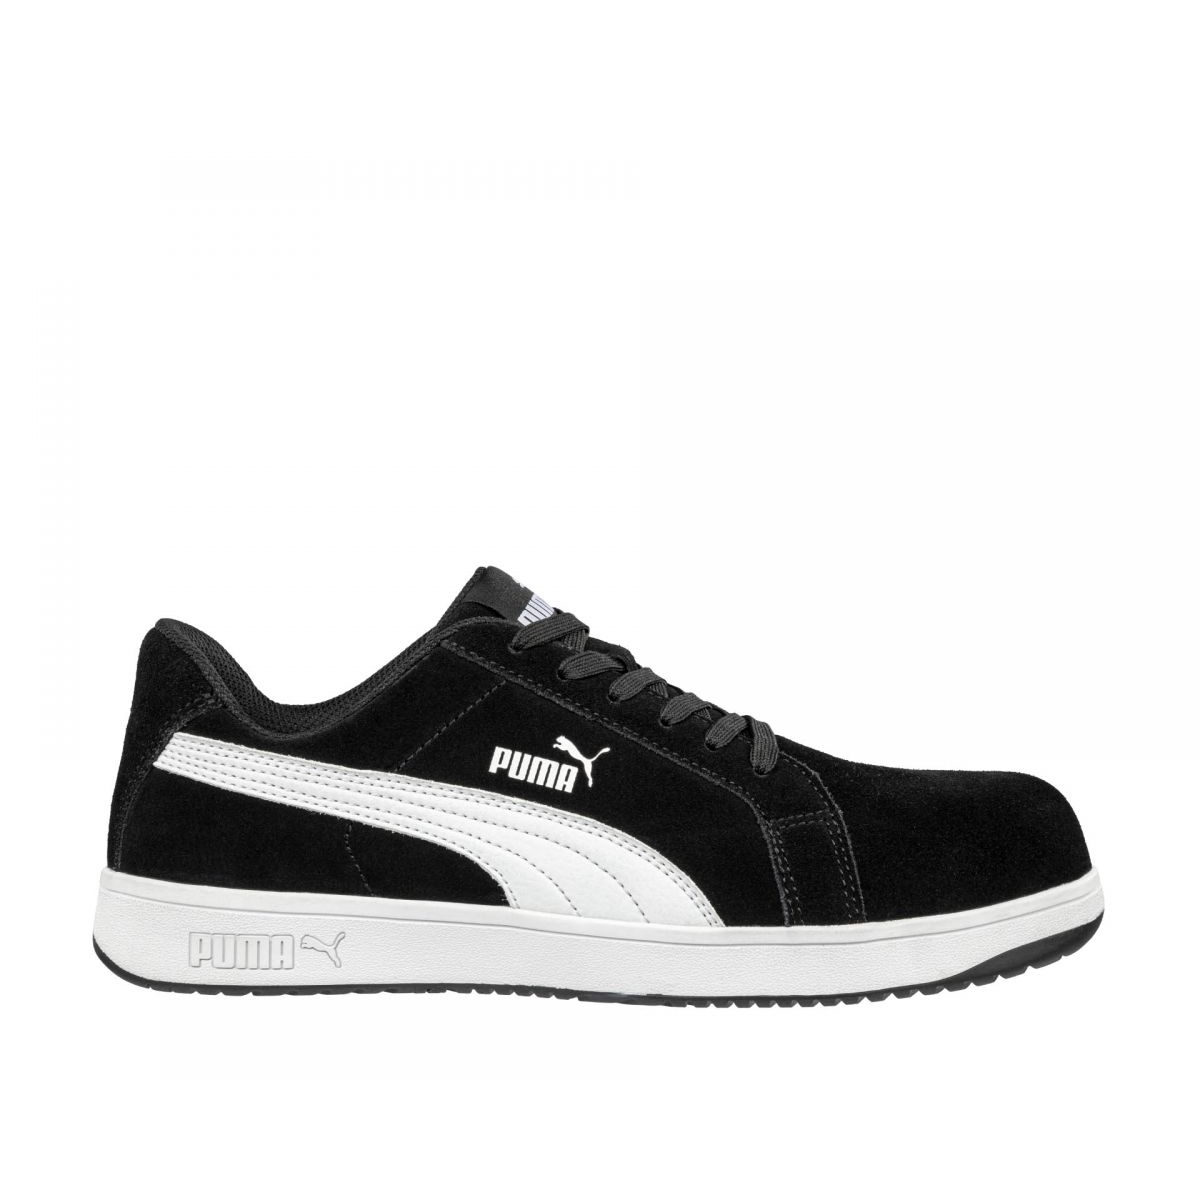 PUMA Safety Men's Iconic Low Composite Toe EH Work Shoes Black Suede - 640015 ONE SIZE BLACK - BLACK, 10.5